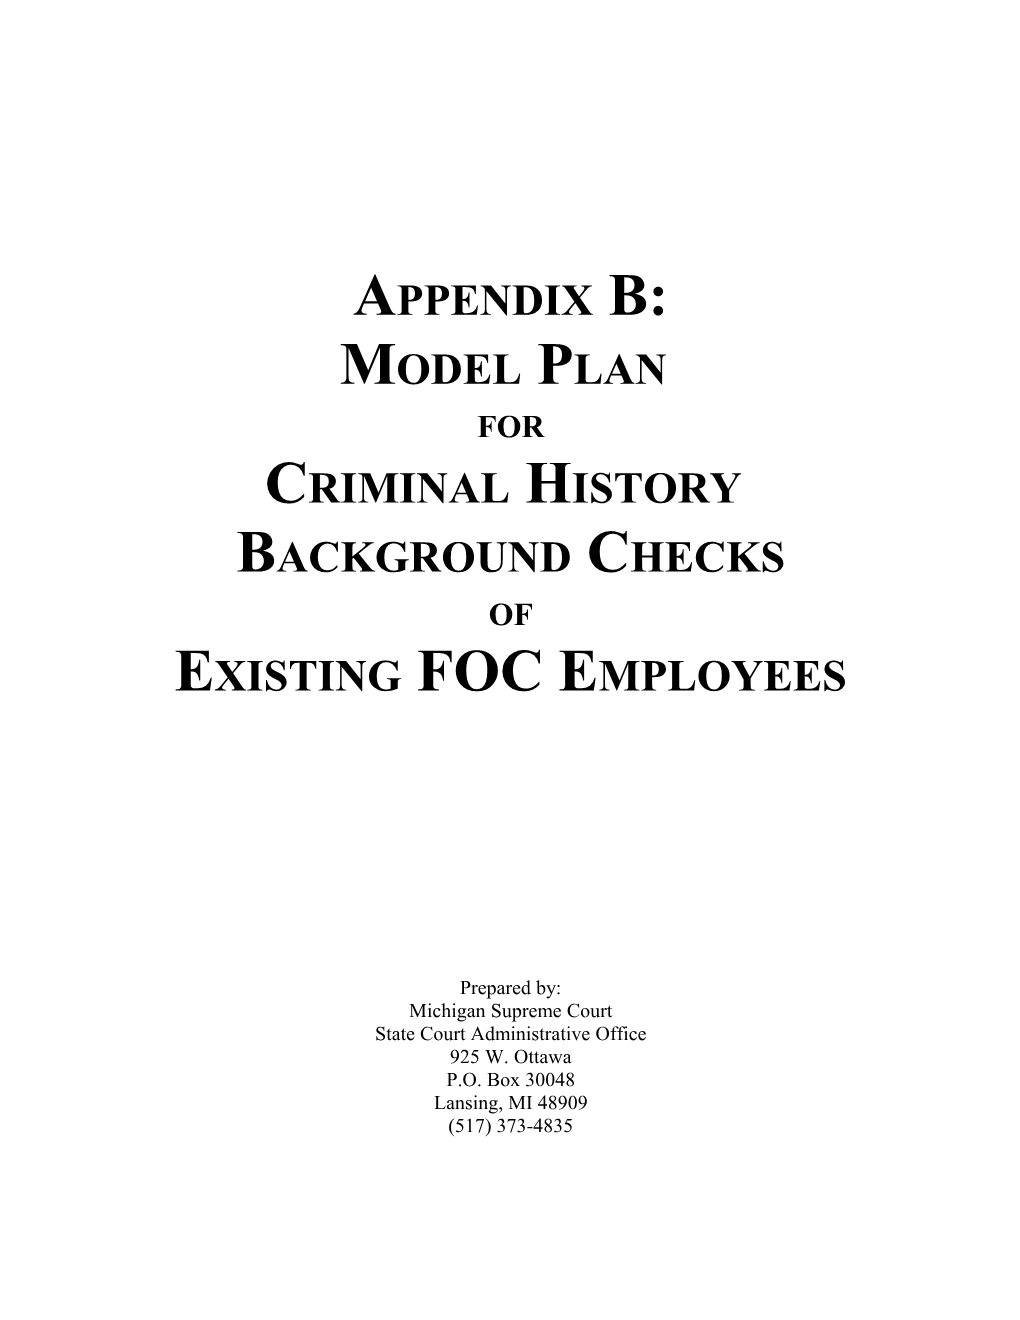 Appendix B: Plan for Conducting a Criminal Background Check of Existing FOC Employees